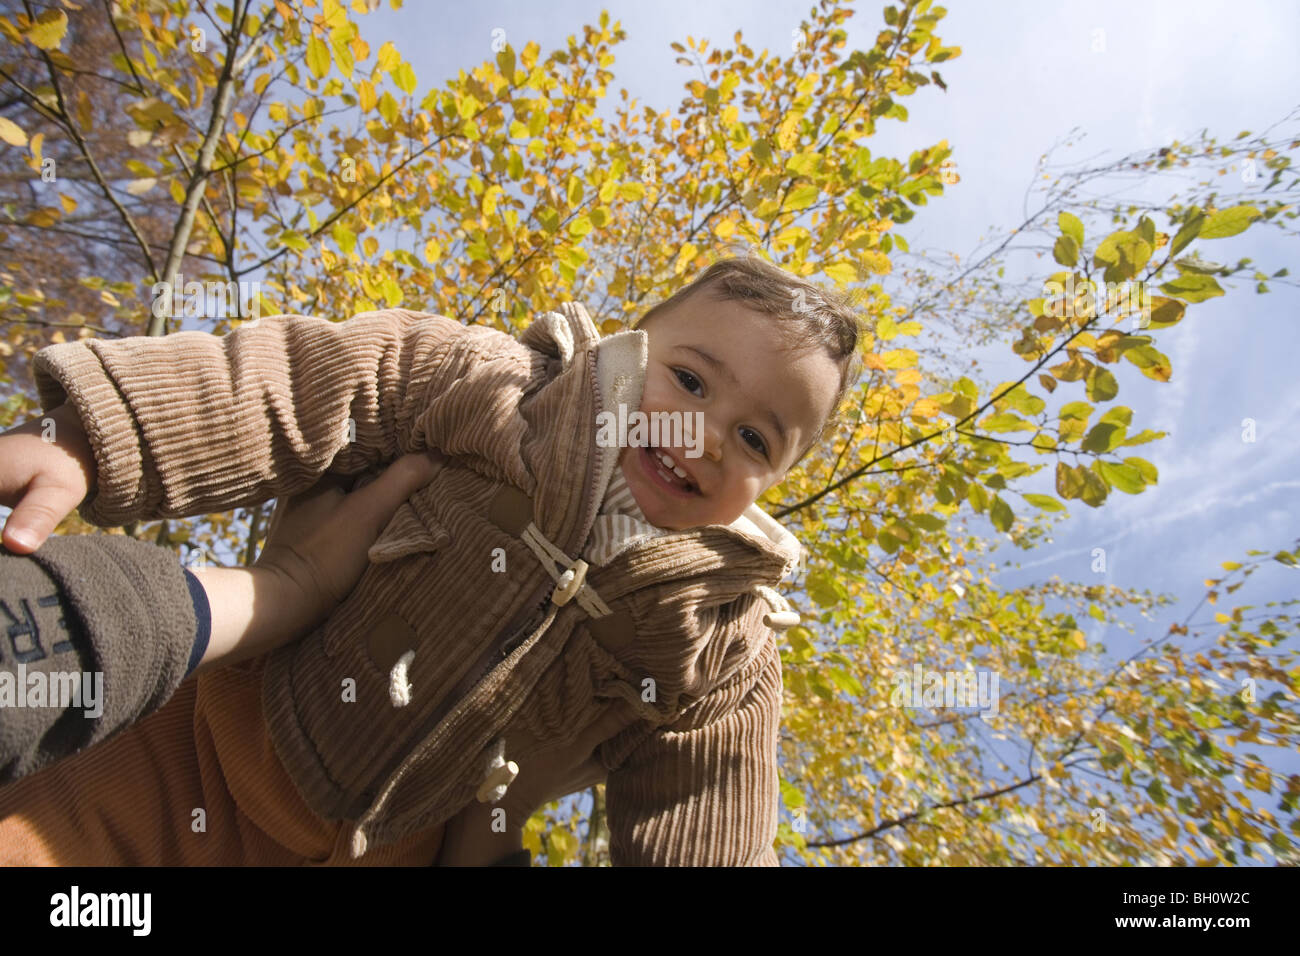 Child lifted up, Muenchen, Bavaria, Germany Stock Photo